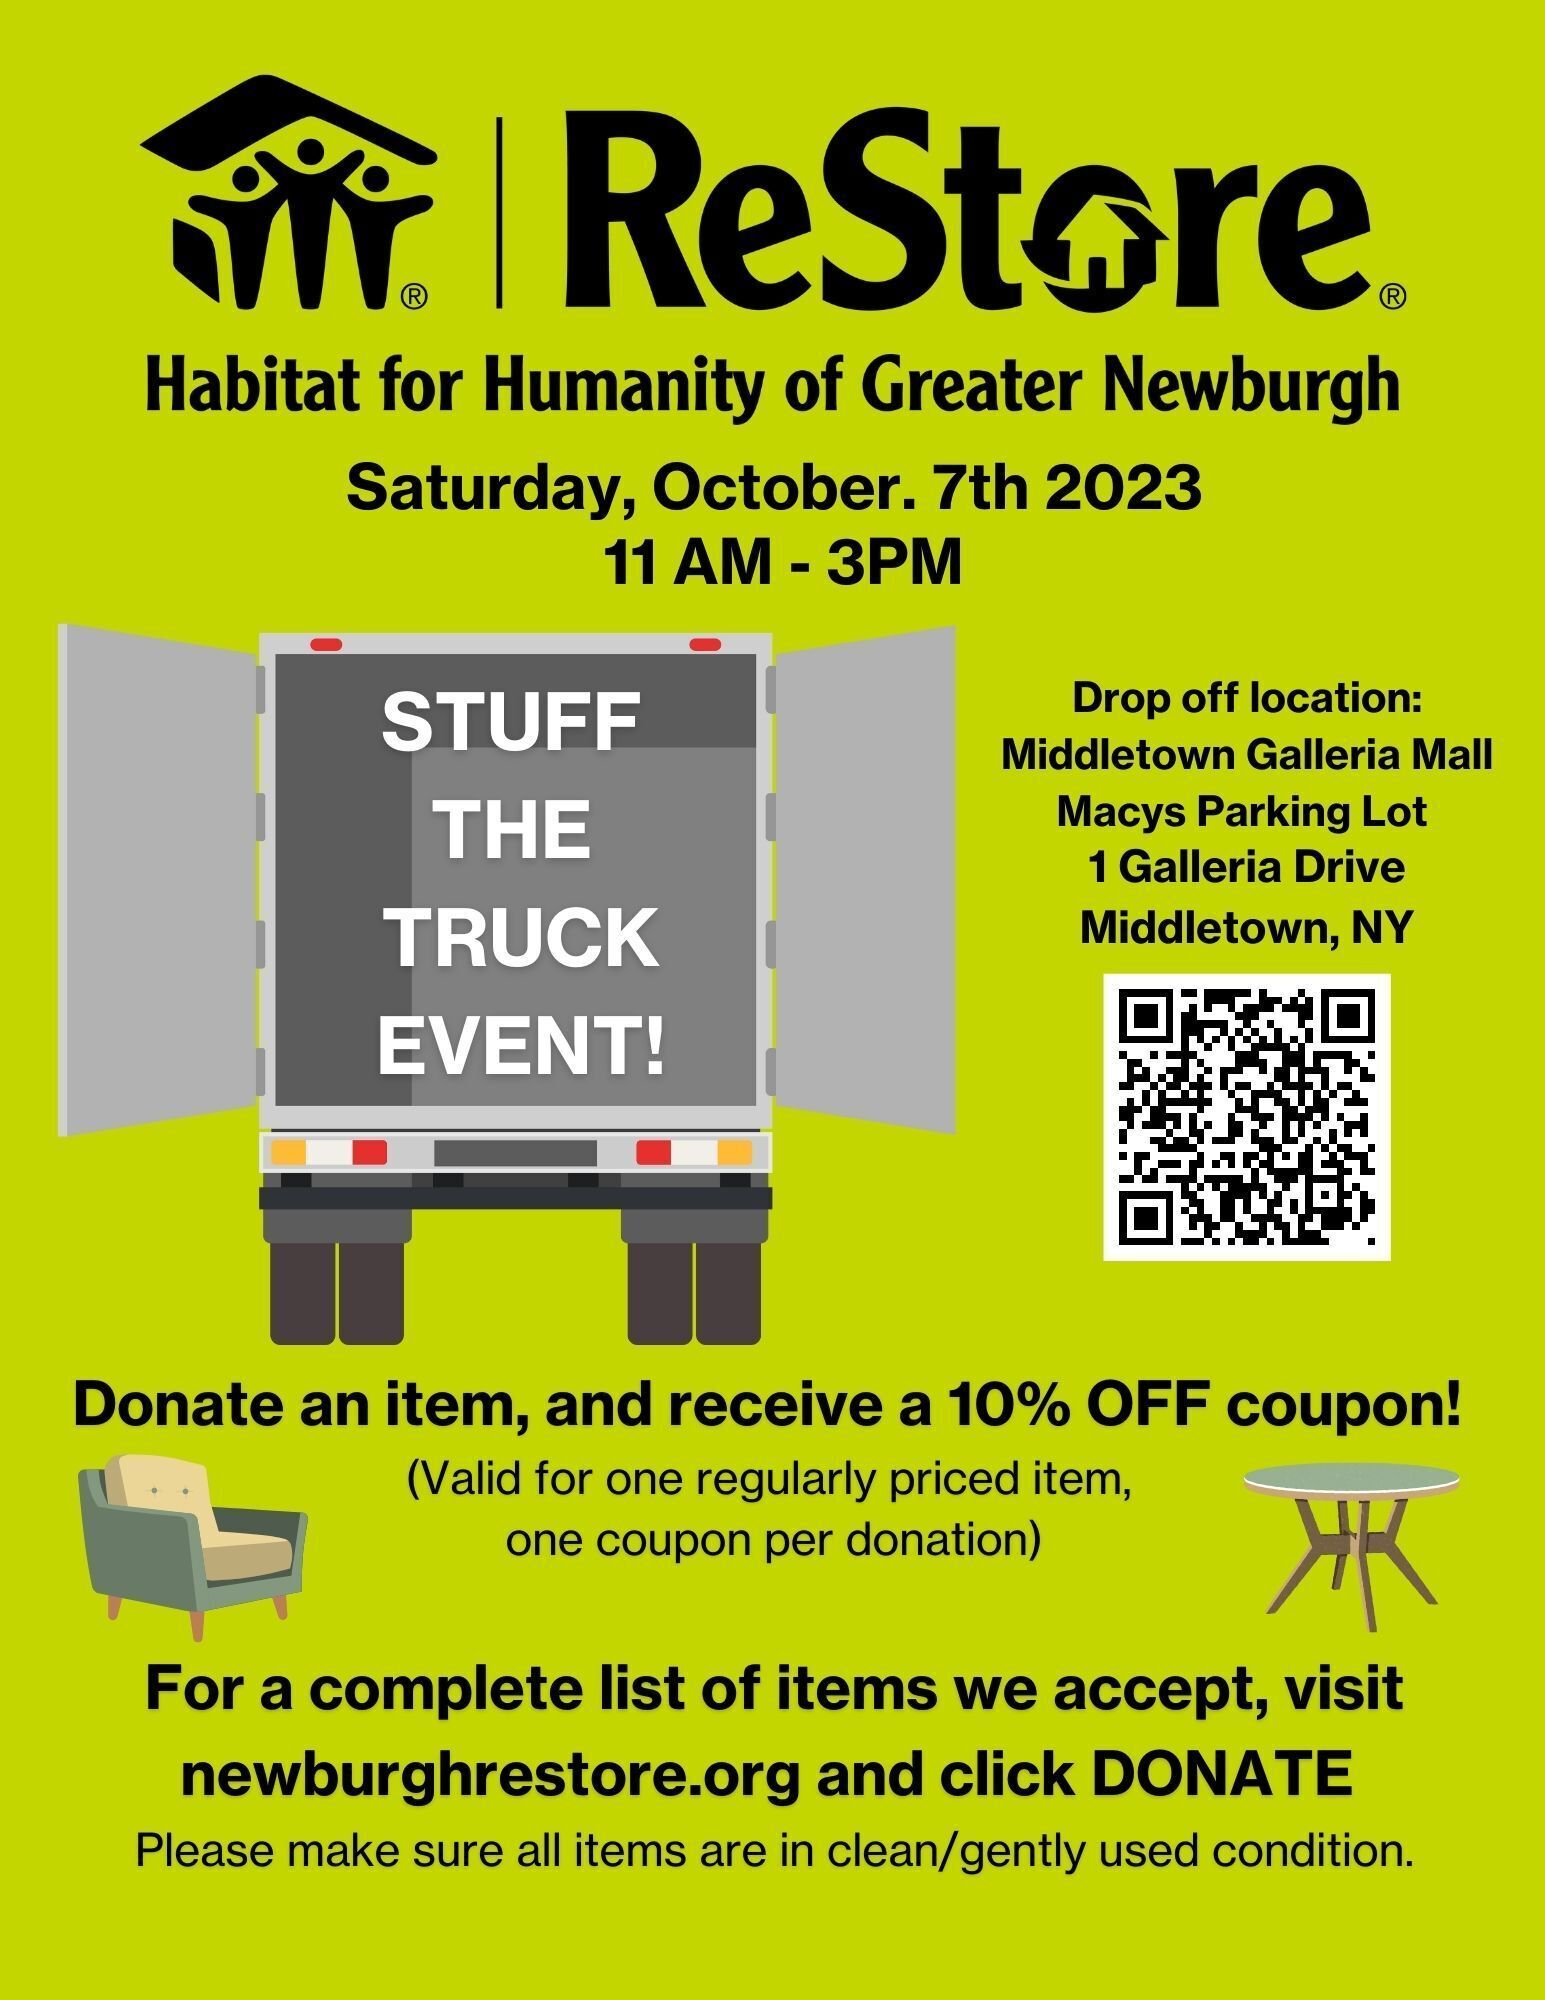 "Stuff the Truck" Event at Middletown Galleria - Saturday 10/7, 11 AM - 3 PM